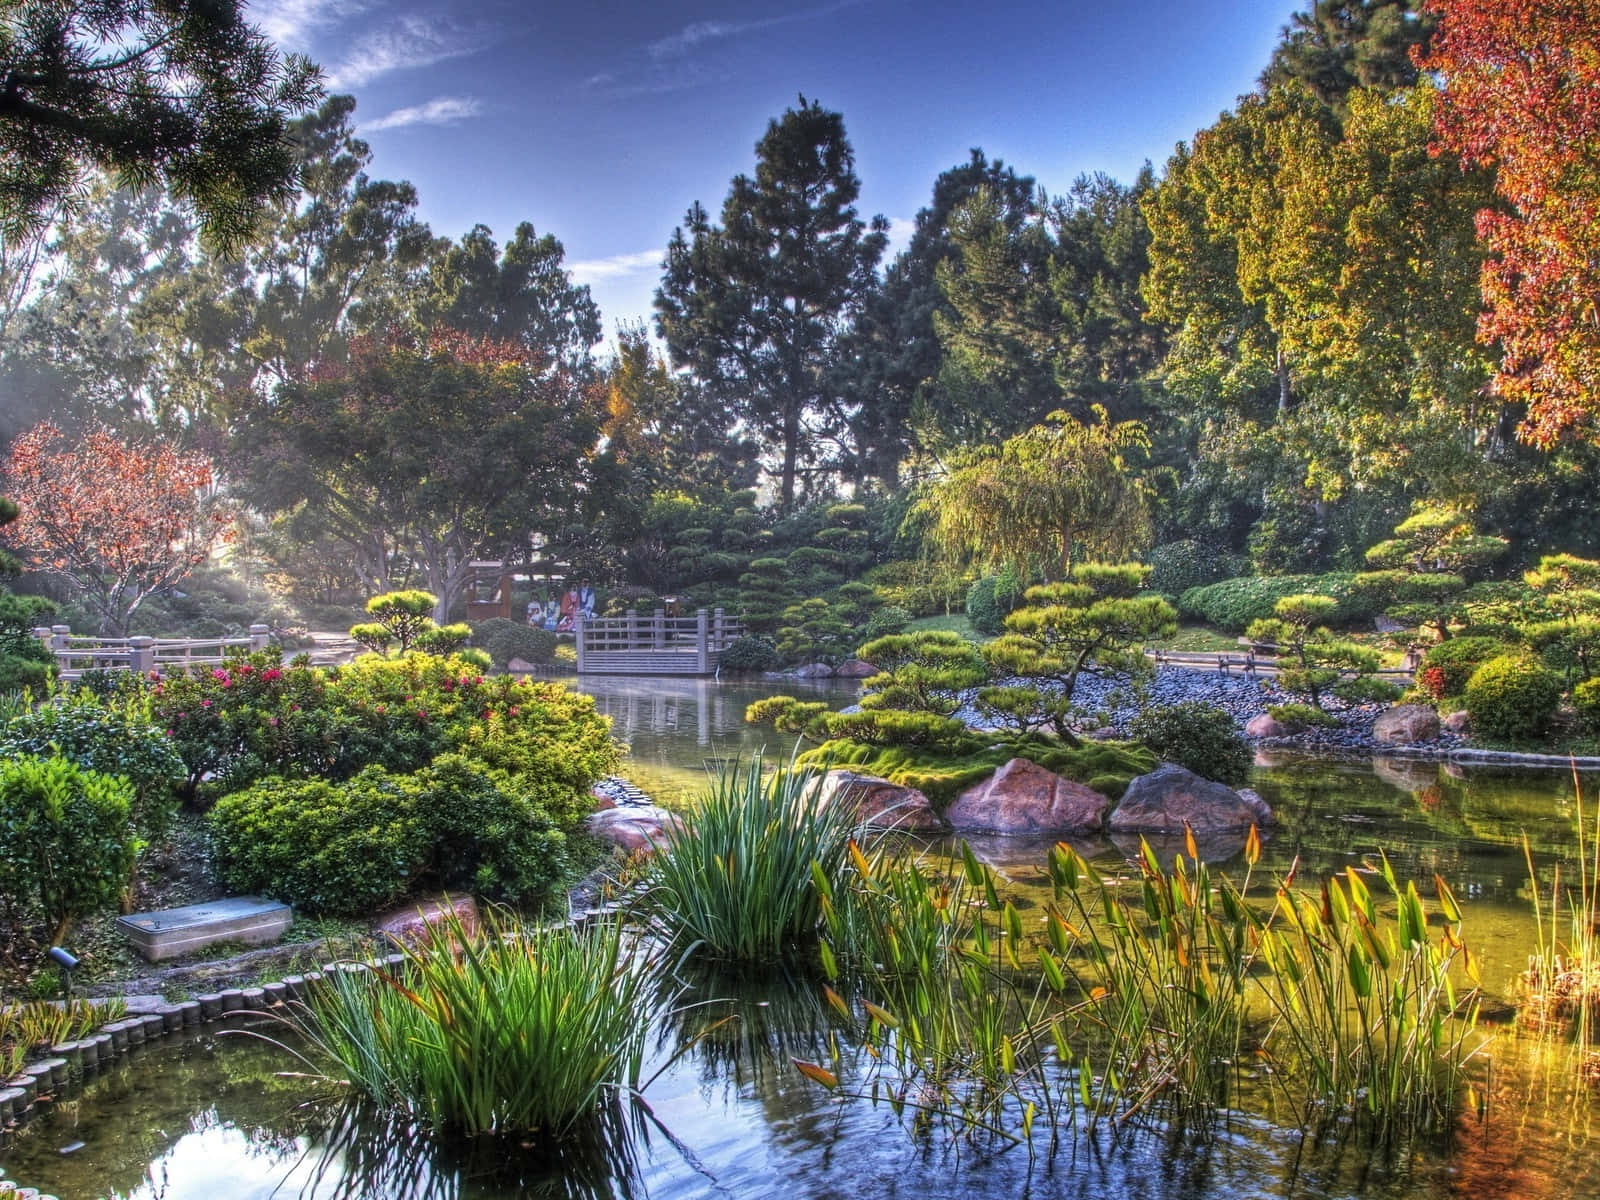 Explore Nature’s Beauty - Take in the Wonders of a Garden.